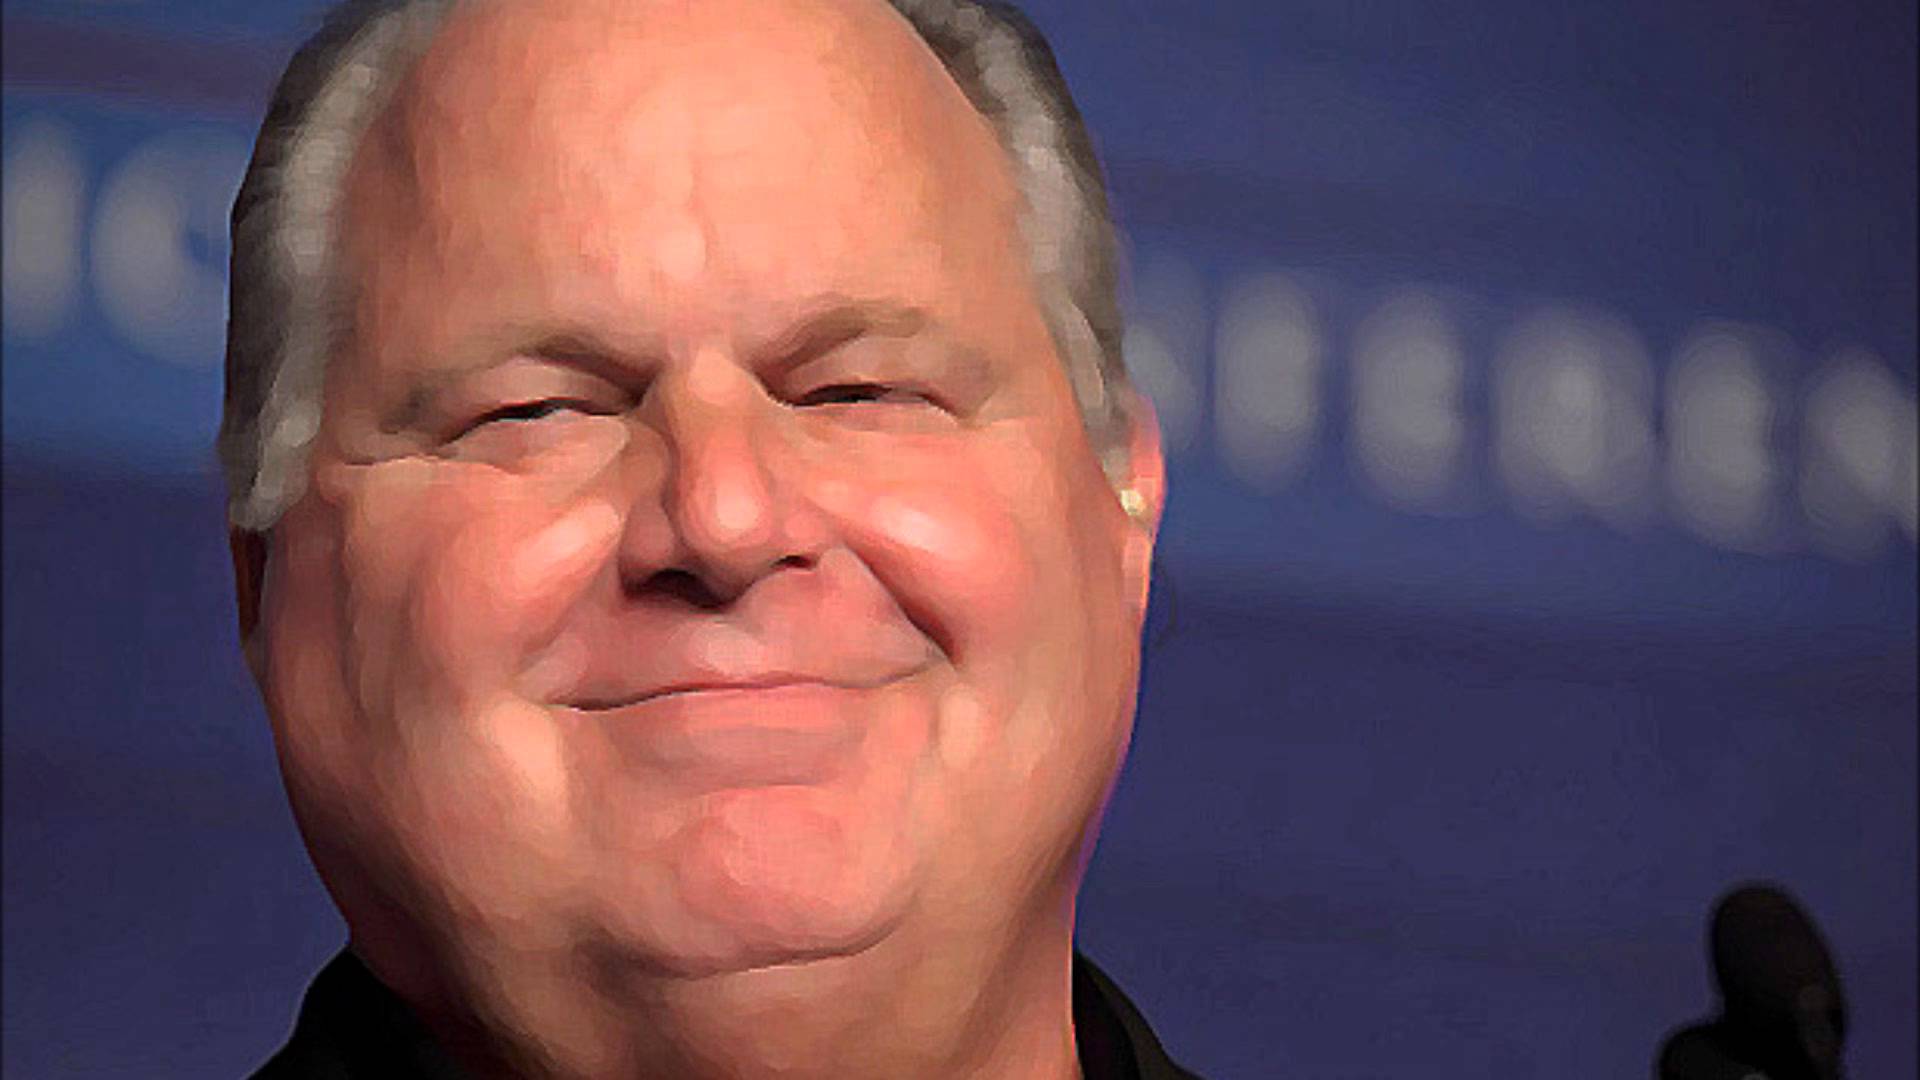 Rush Limbaugh wants to platonically hang out with your wife and daughter in a Motel 6